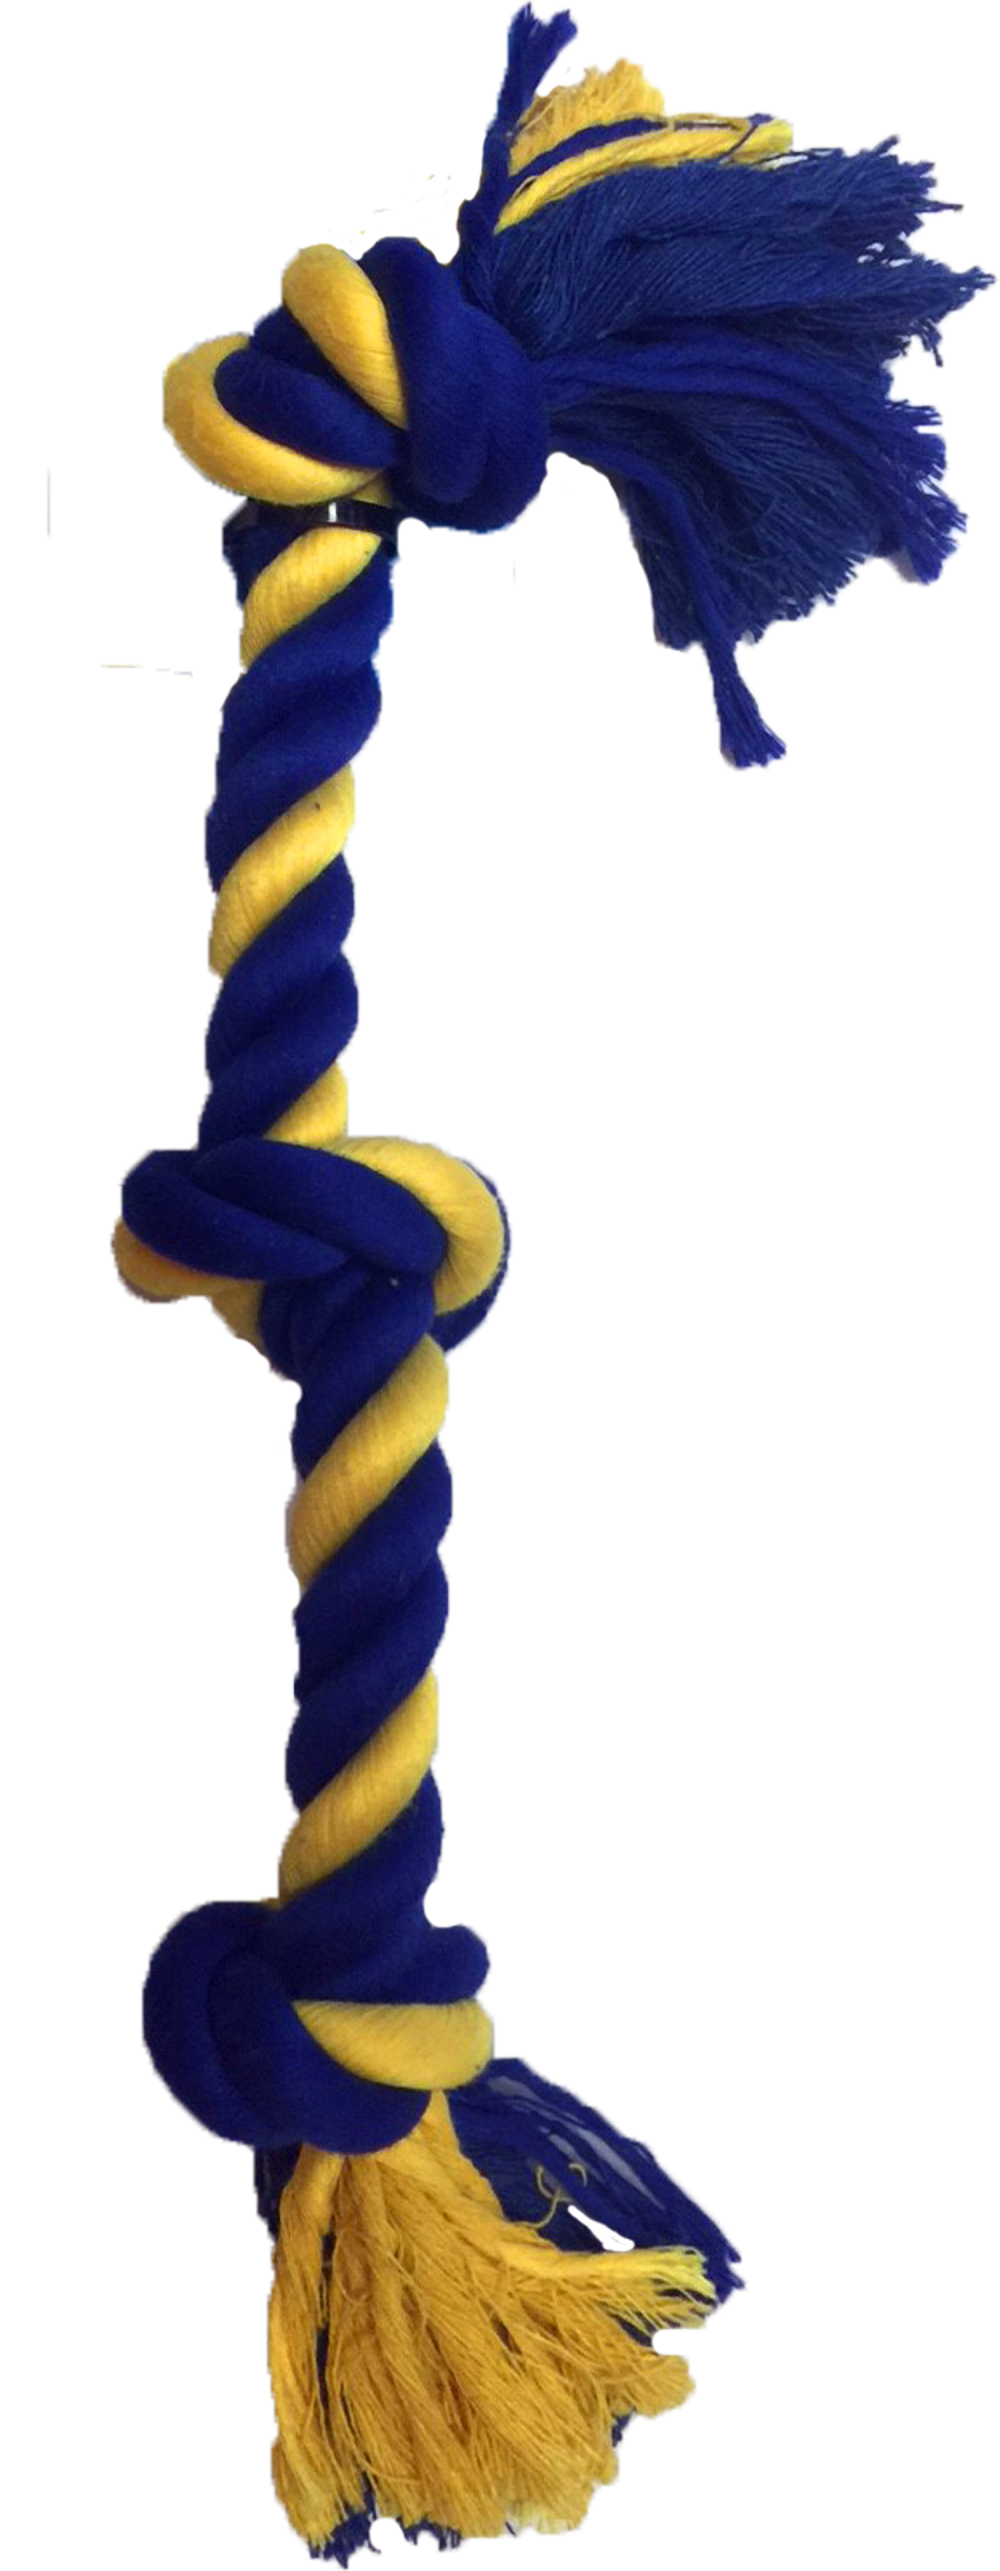 4-Knot Cotton Rope 63 cm